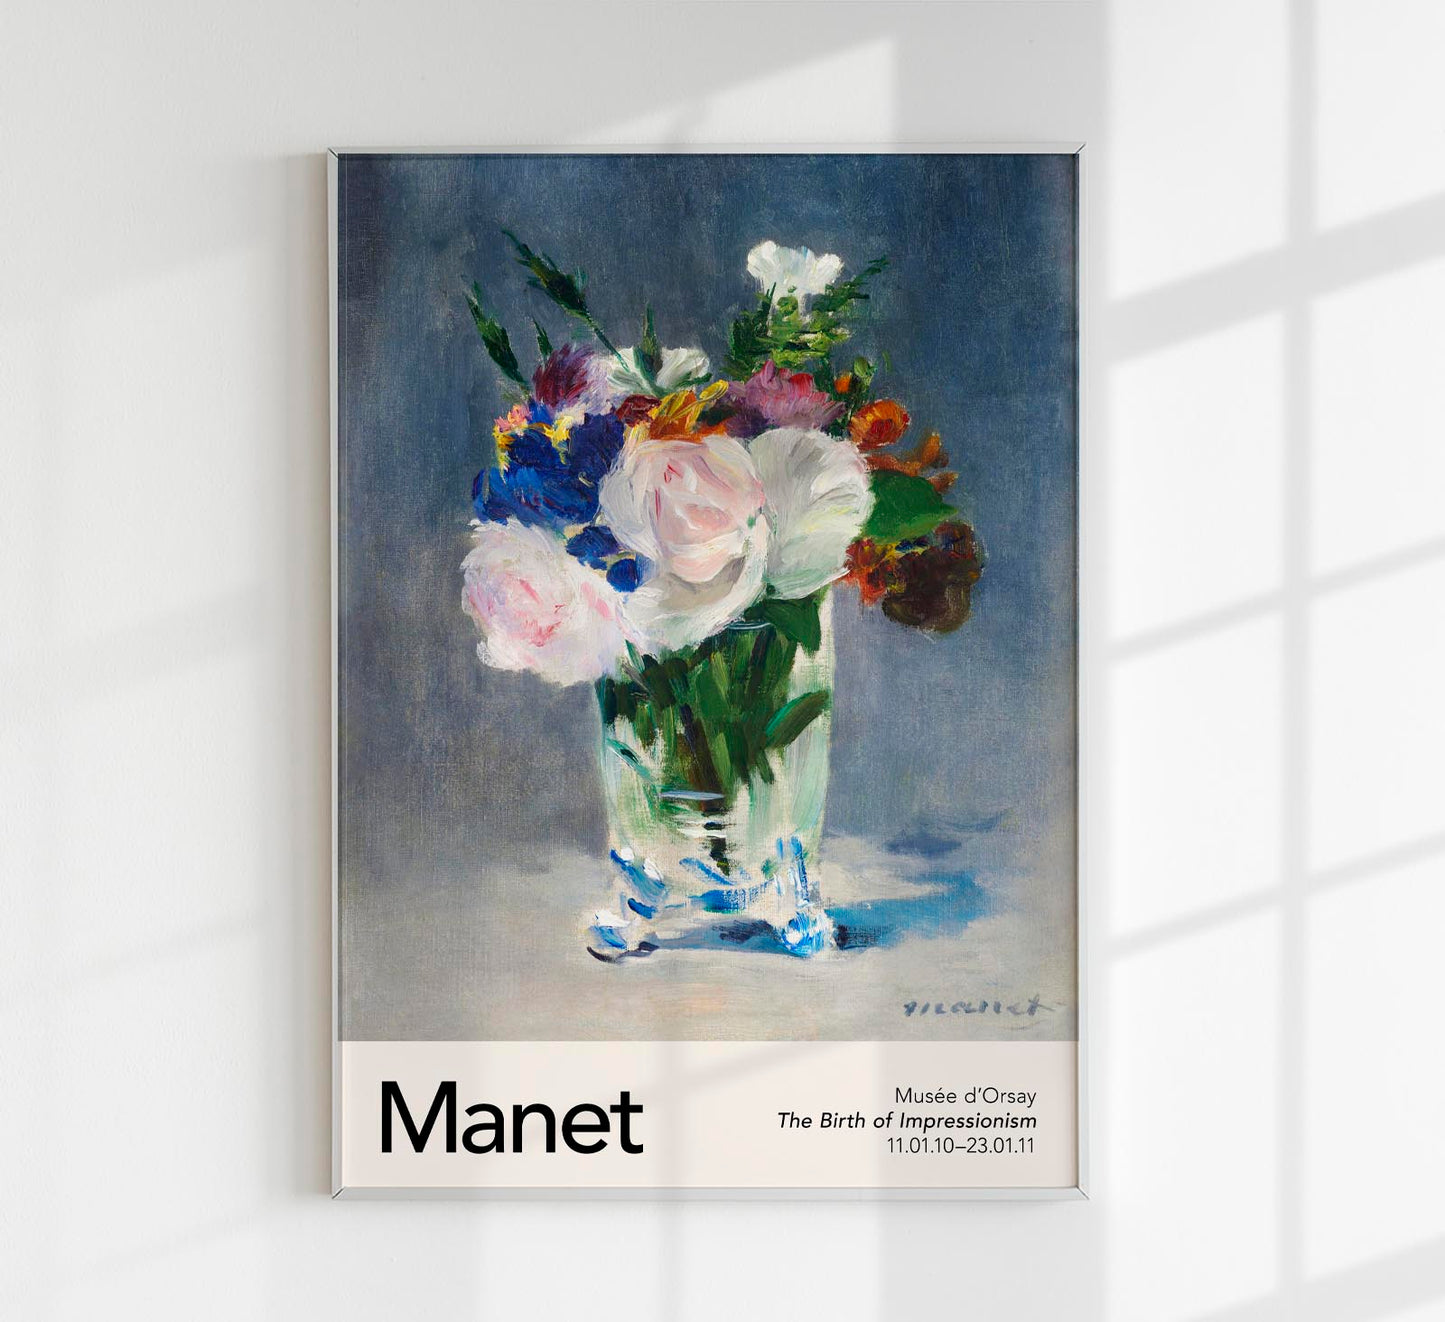 Flowers in a Crystal Vase by Manet Exhibition Poster